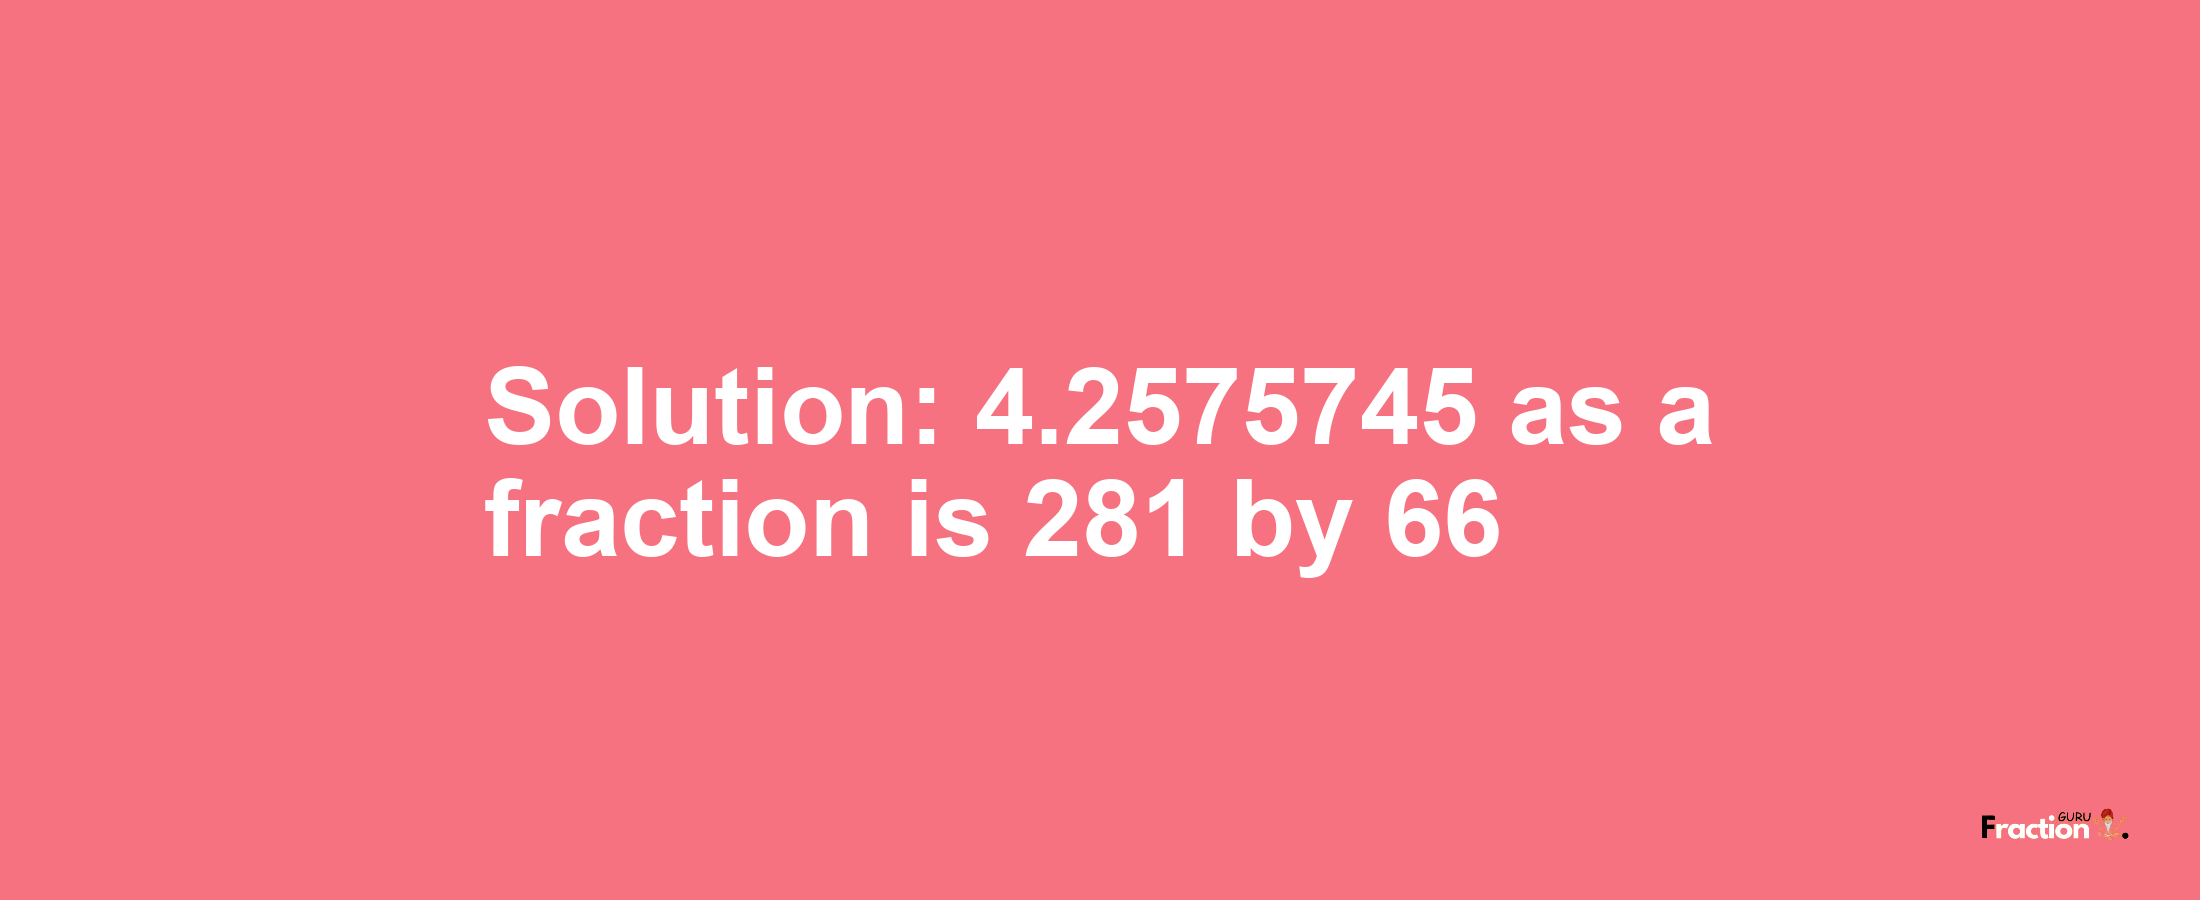 Solution:4.2575745 as a fraction is 281/66